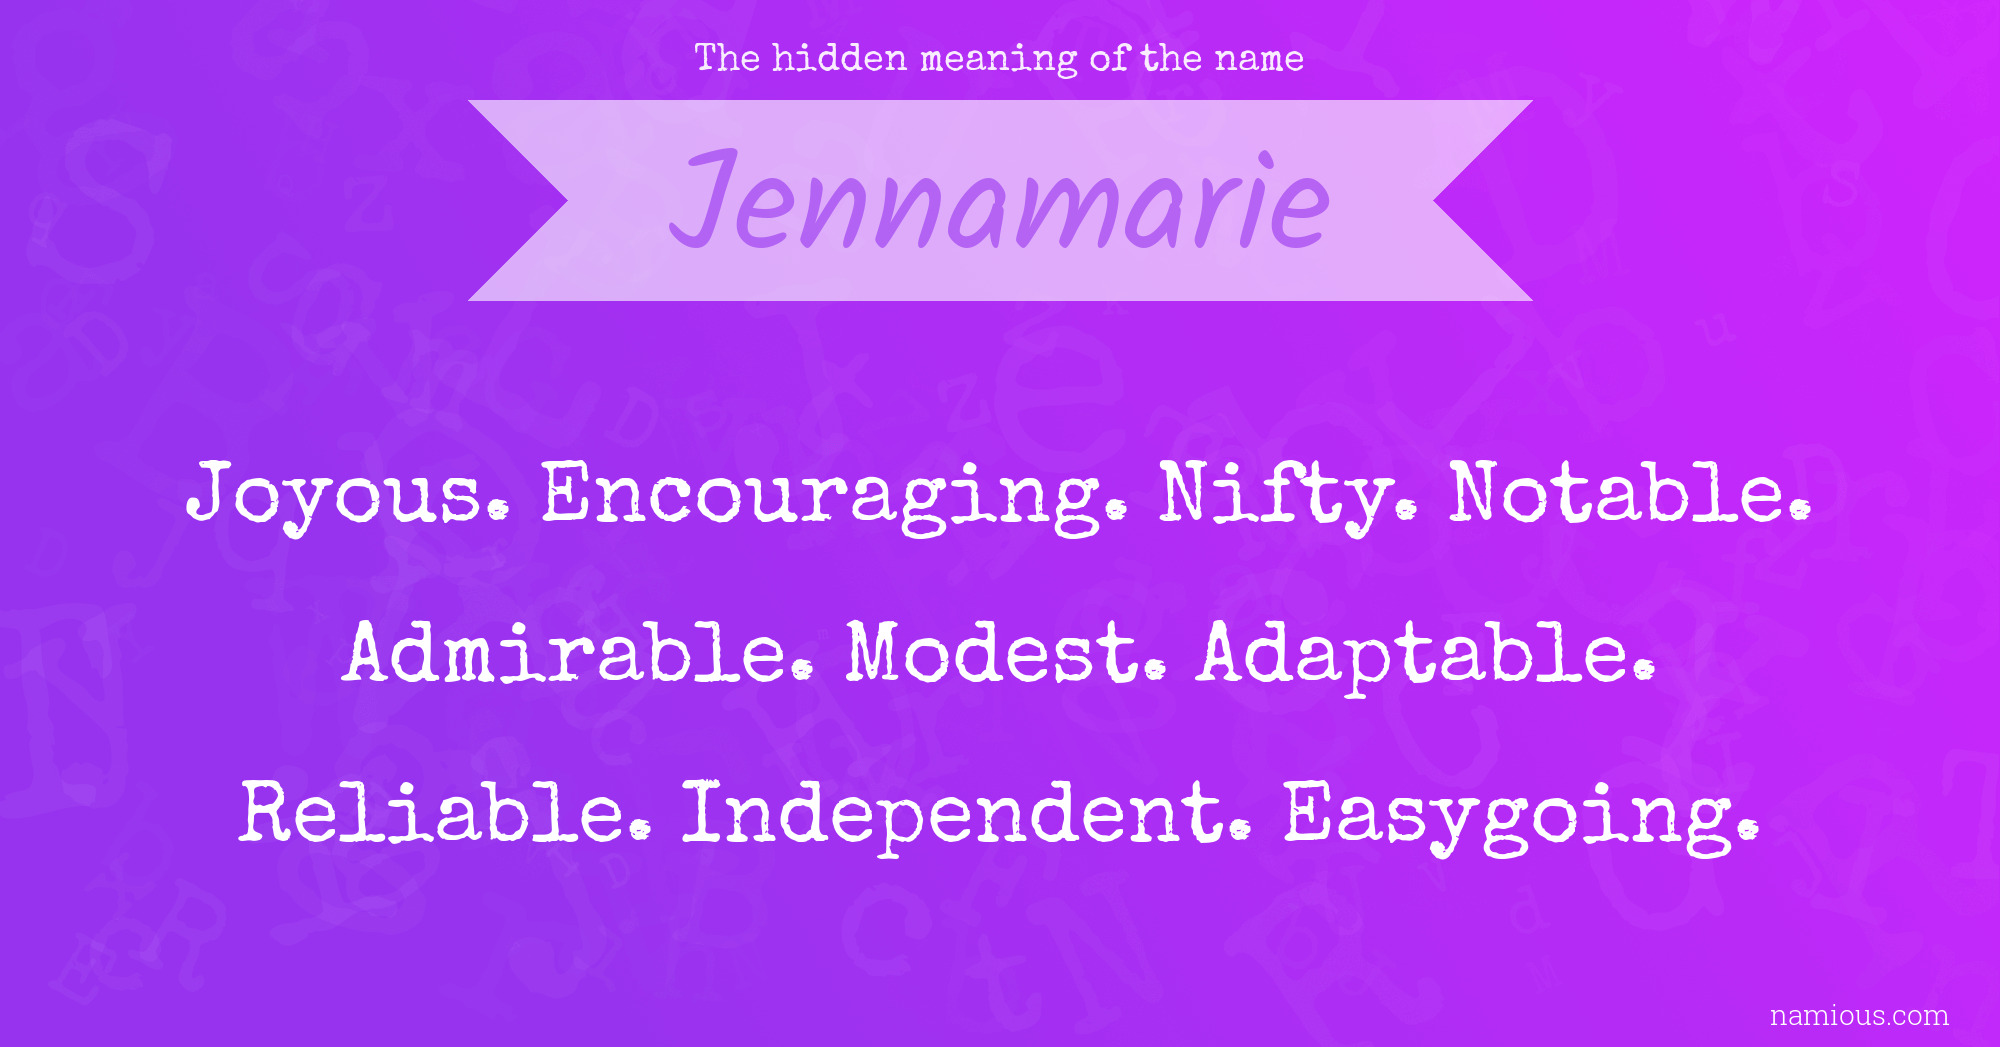 The hidden meaning of the name Jennamarie